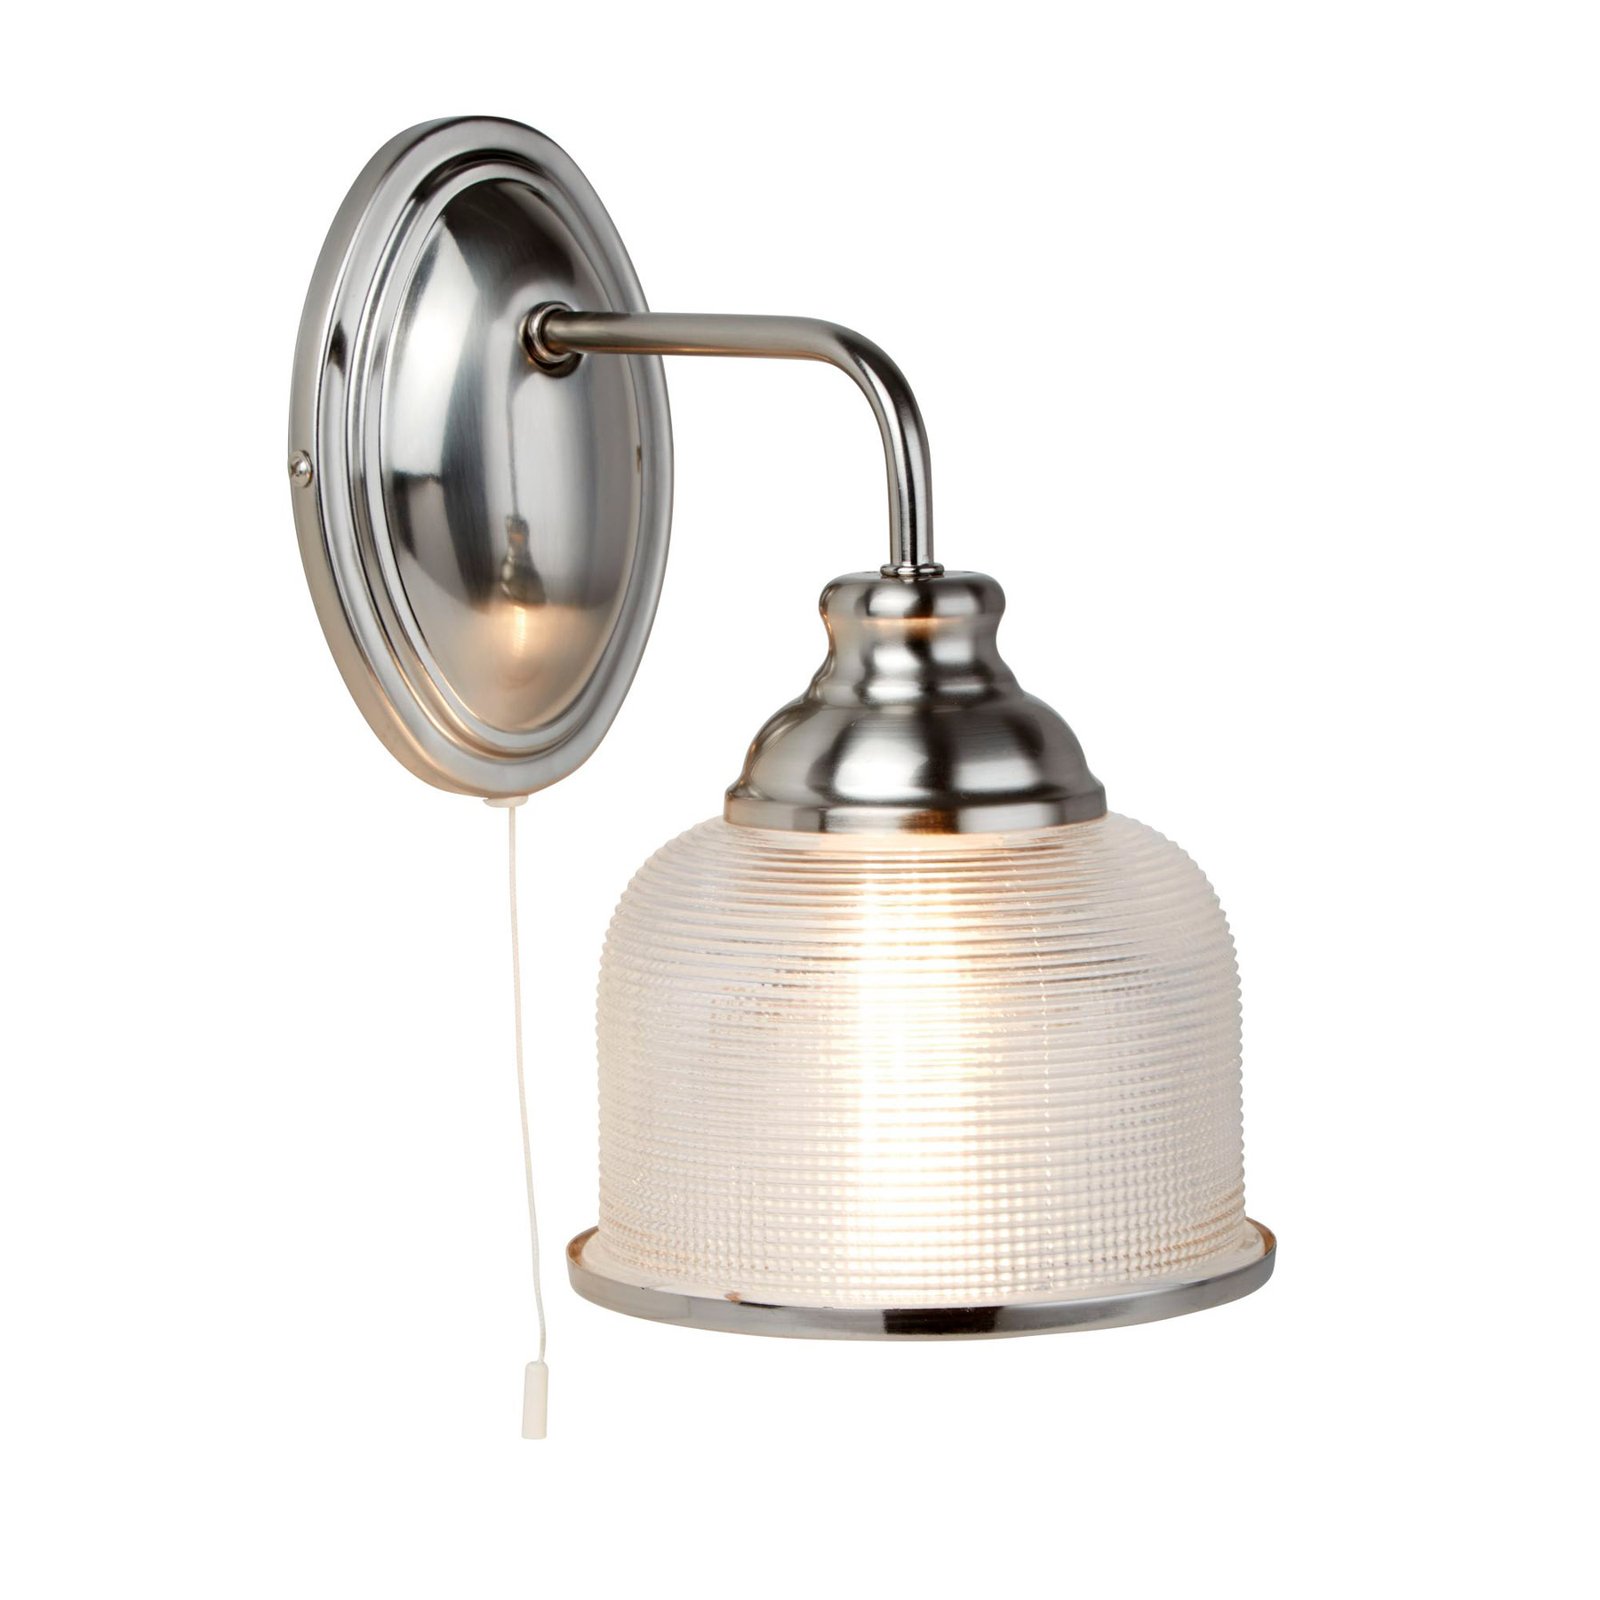 Bistro II wall light silver/fluted glass